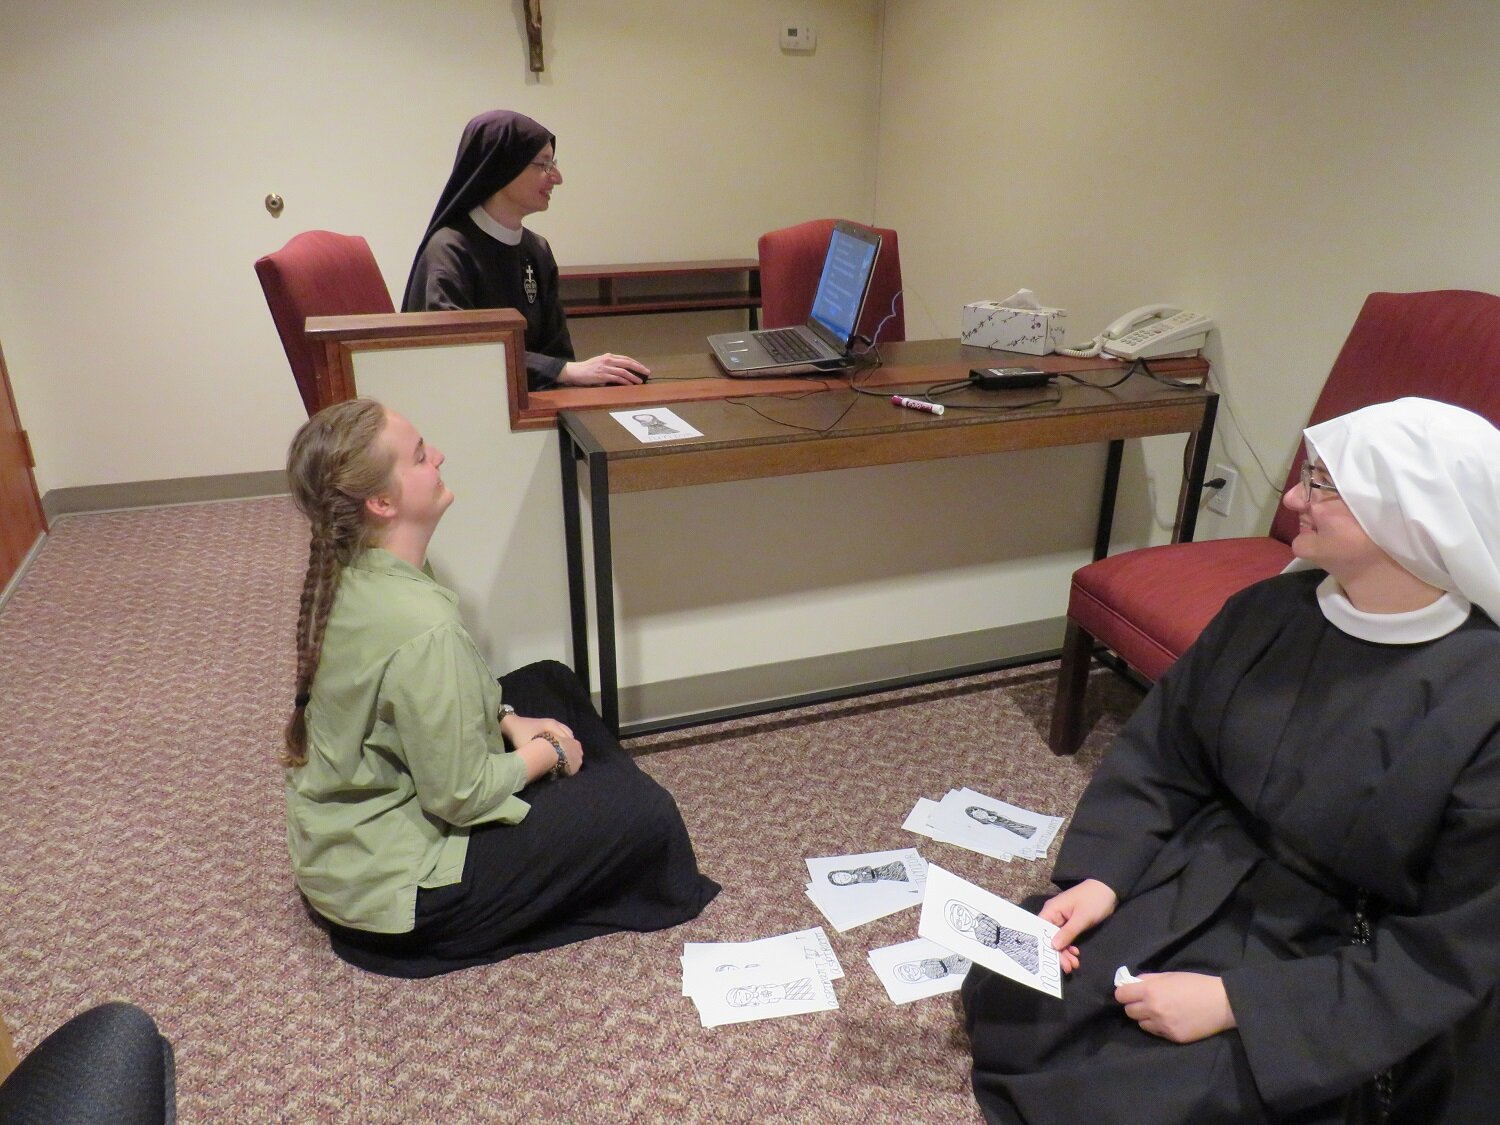  Sister Cecilia Maria, Aspirant Abbey, and Sister Miriam Esther set up for the “Monastery Jeopardy” game 